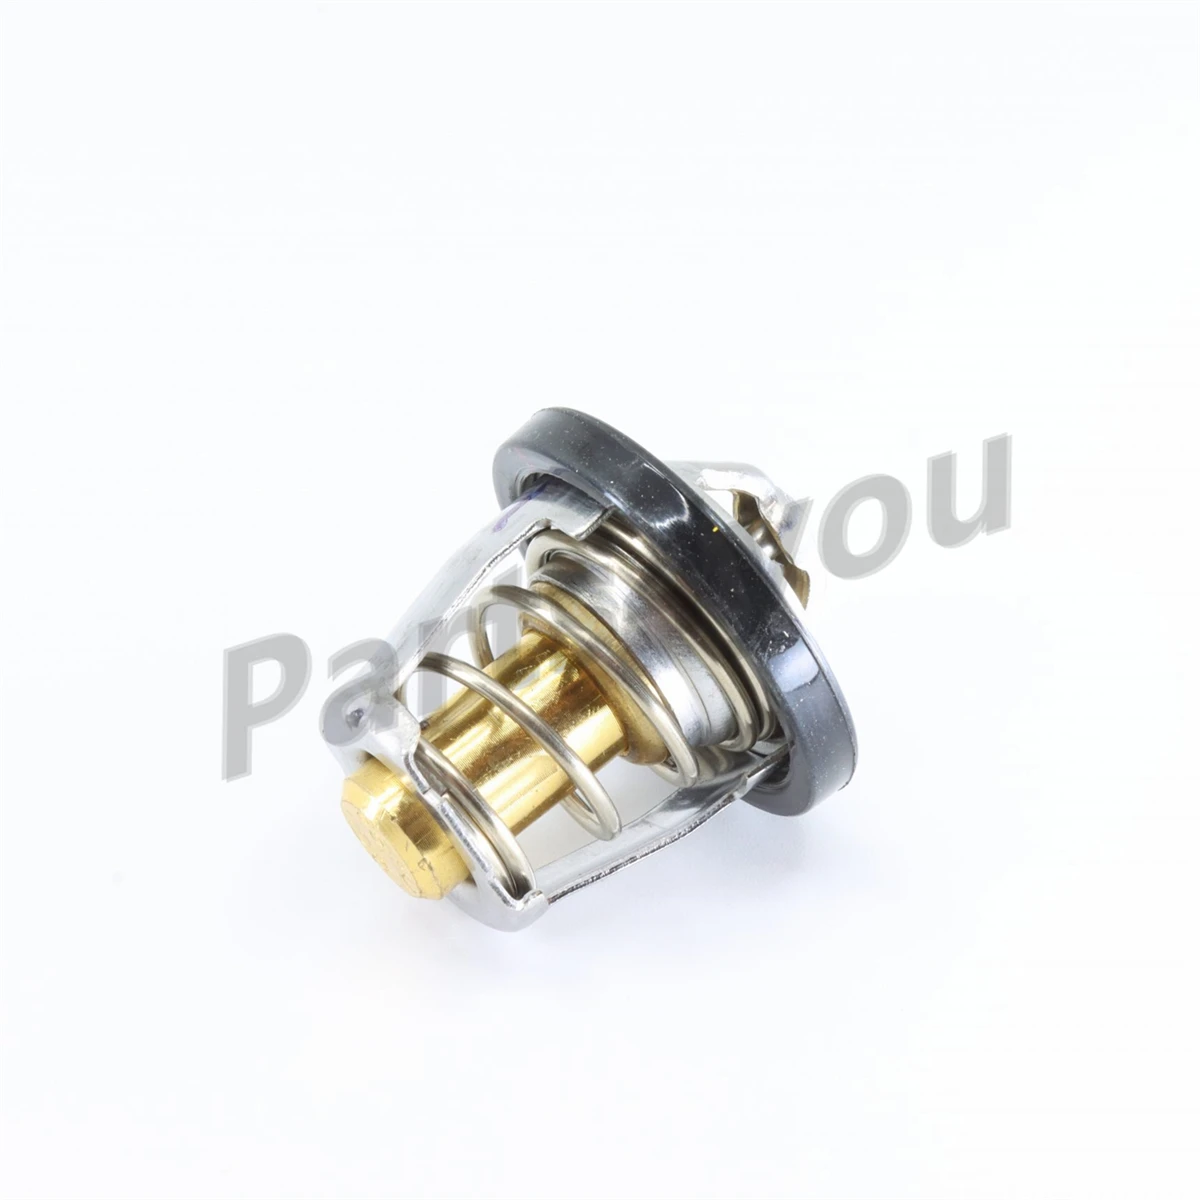 Thermostat for CFmoto 400 450 191Q 500S 520 500HO 550 191R 600 Touring 620 191S 800 800EX 800XC 850 X8H.O. 950 1000 0800-022700